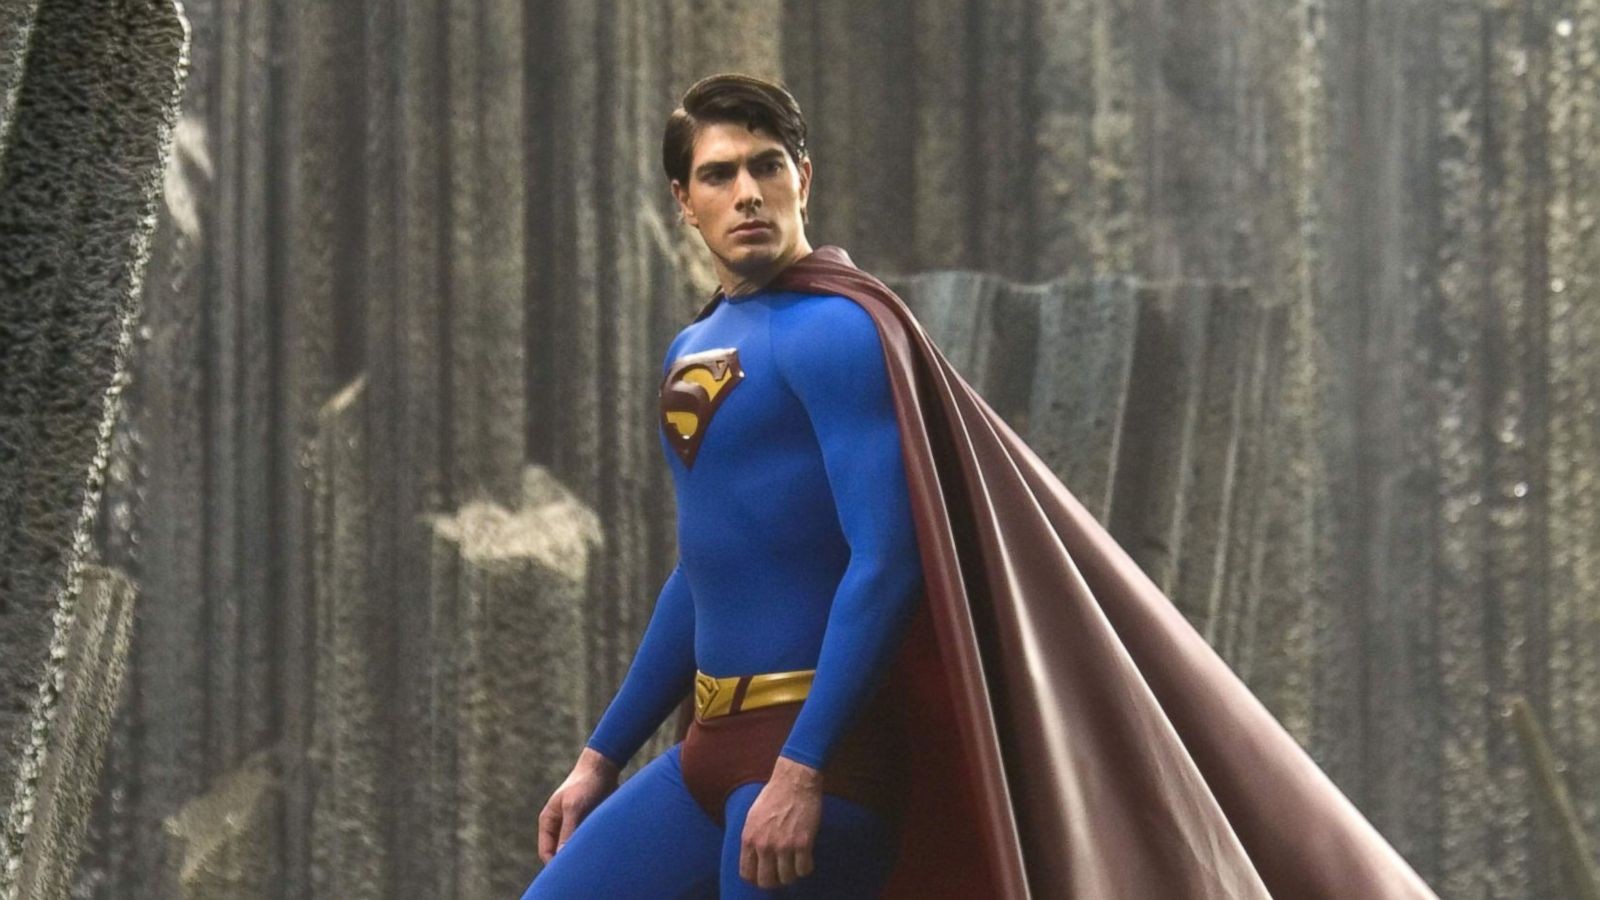 Brandon Routh as Superman in a still from Superman Returns